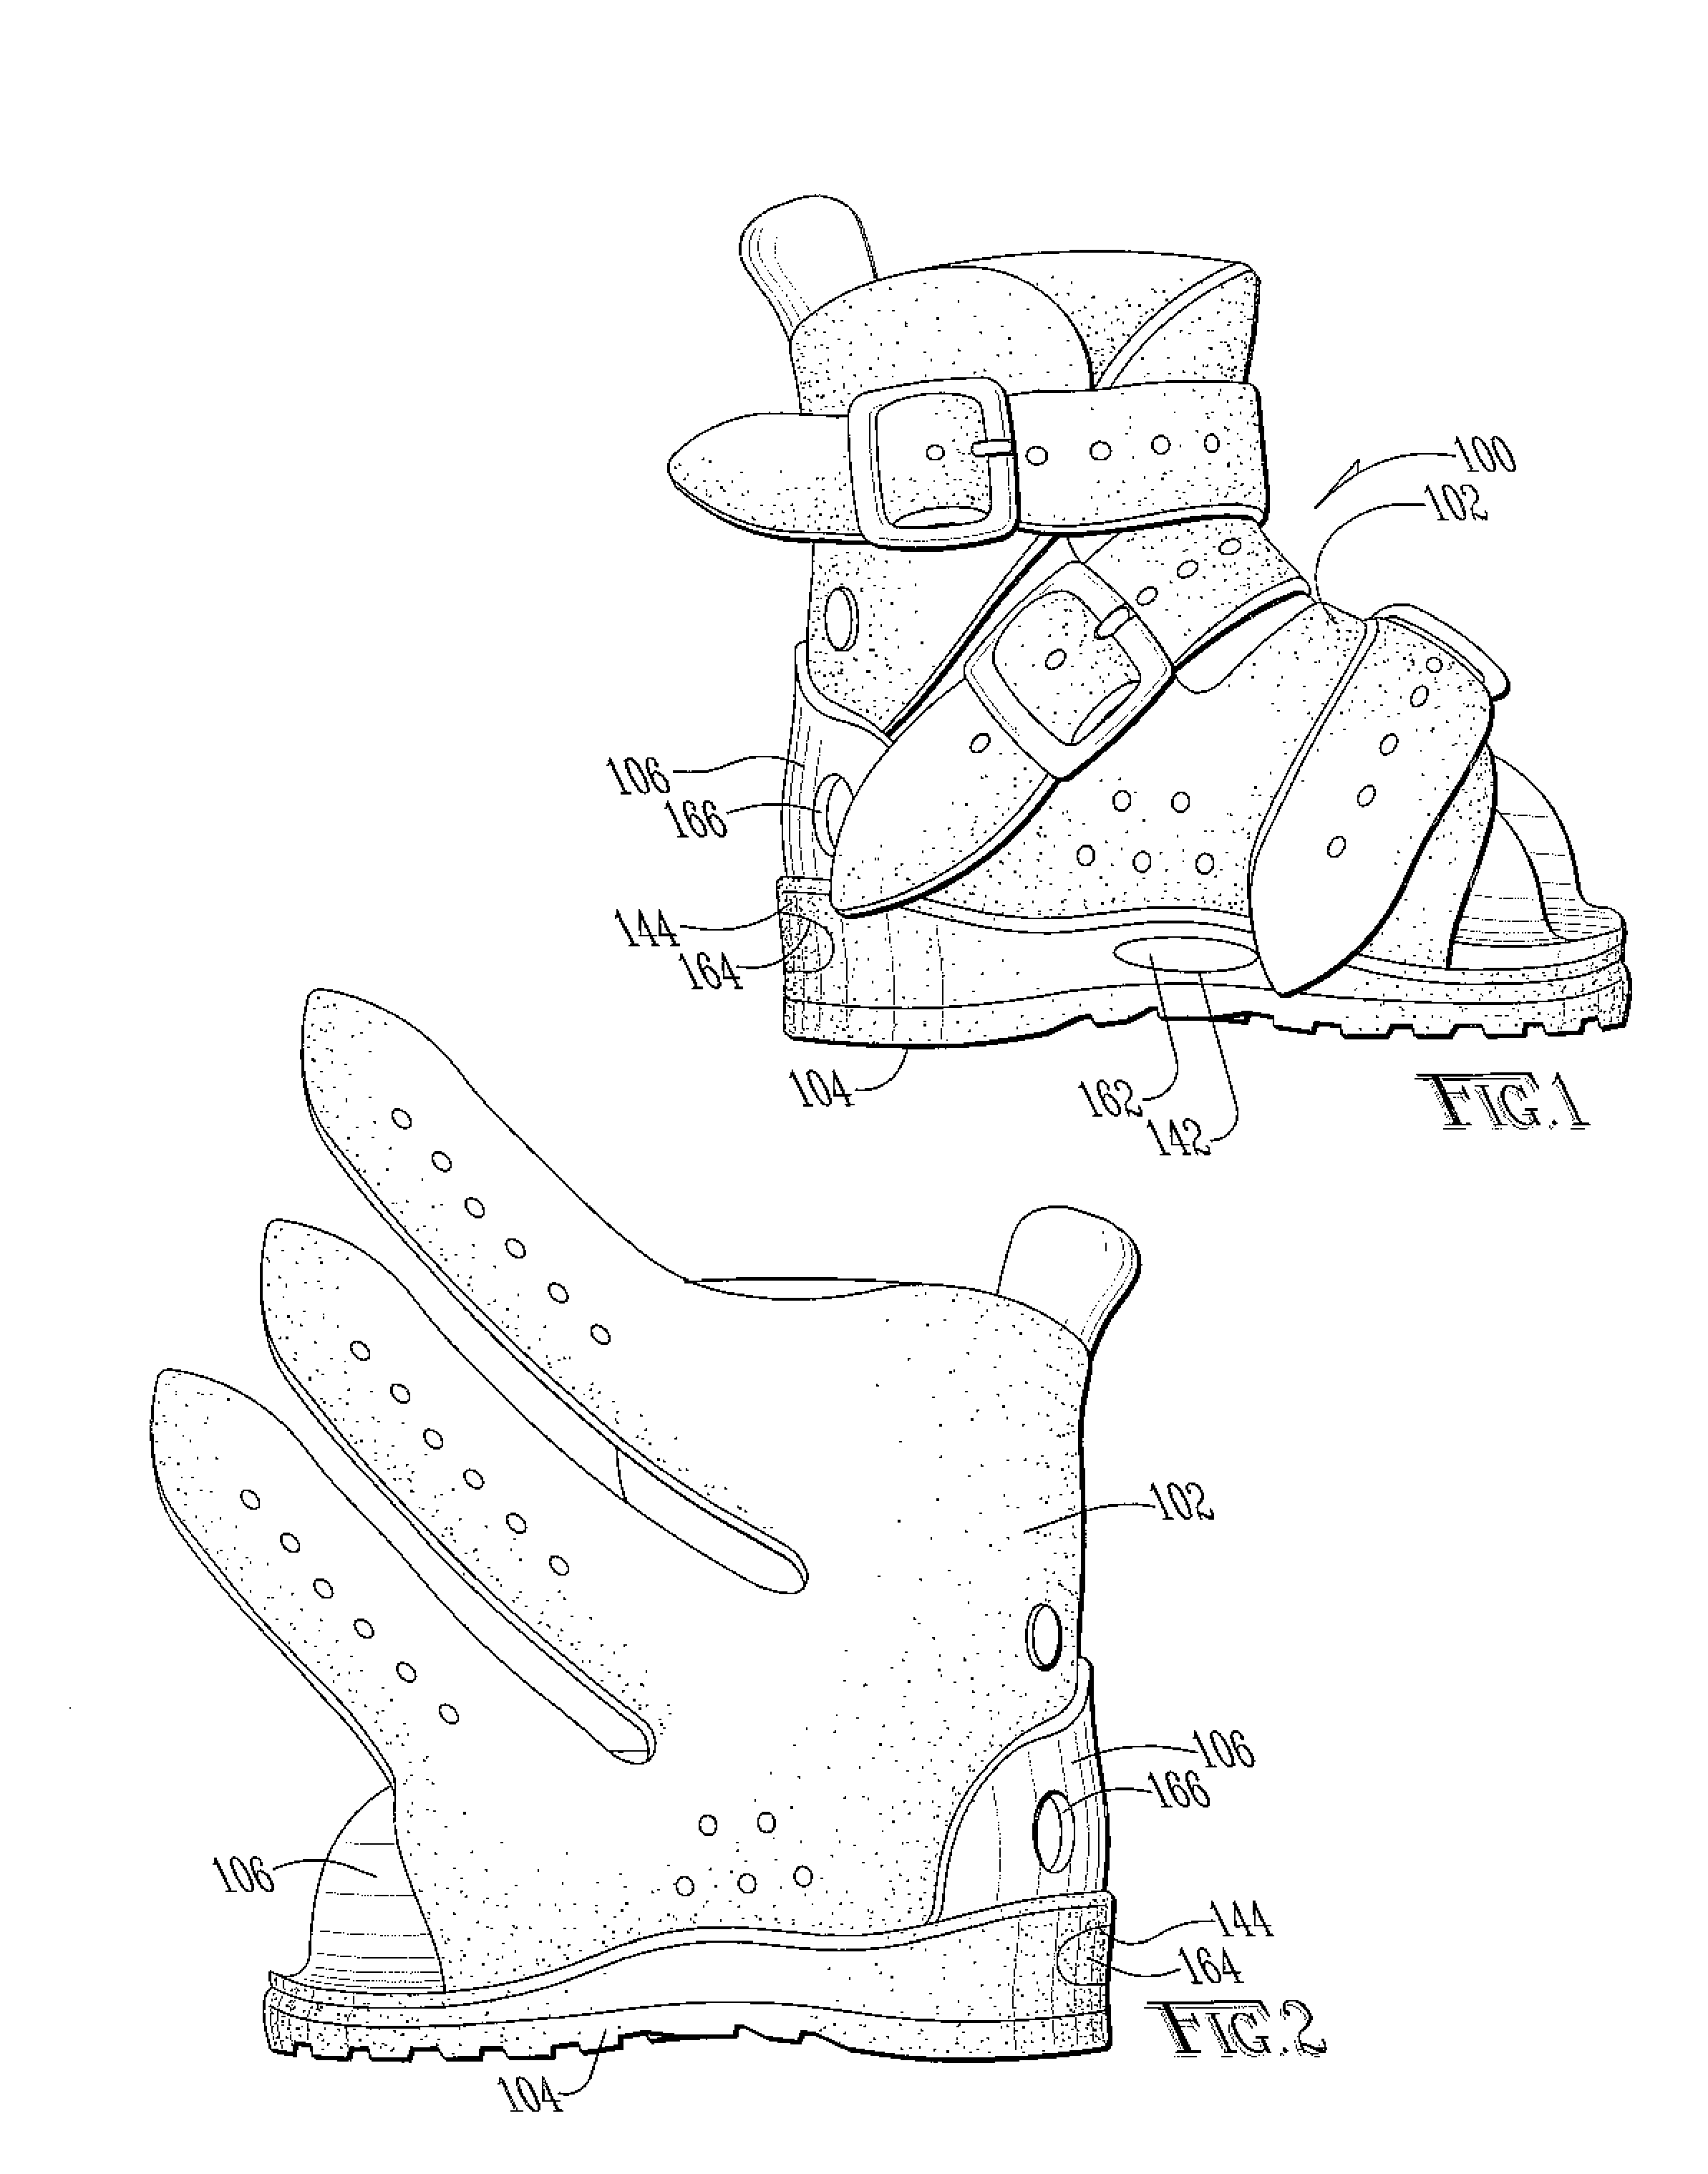 System and method for correcting club foot problems in children